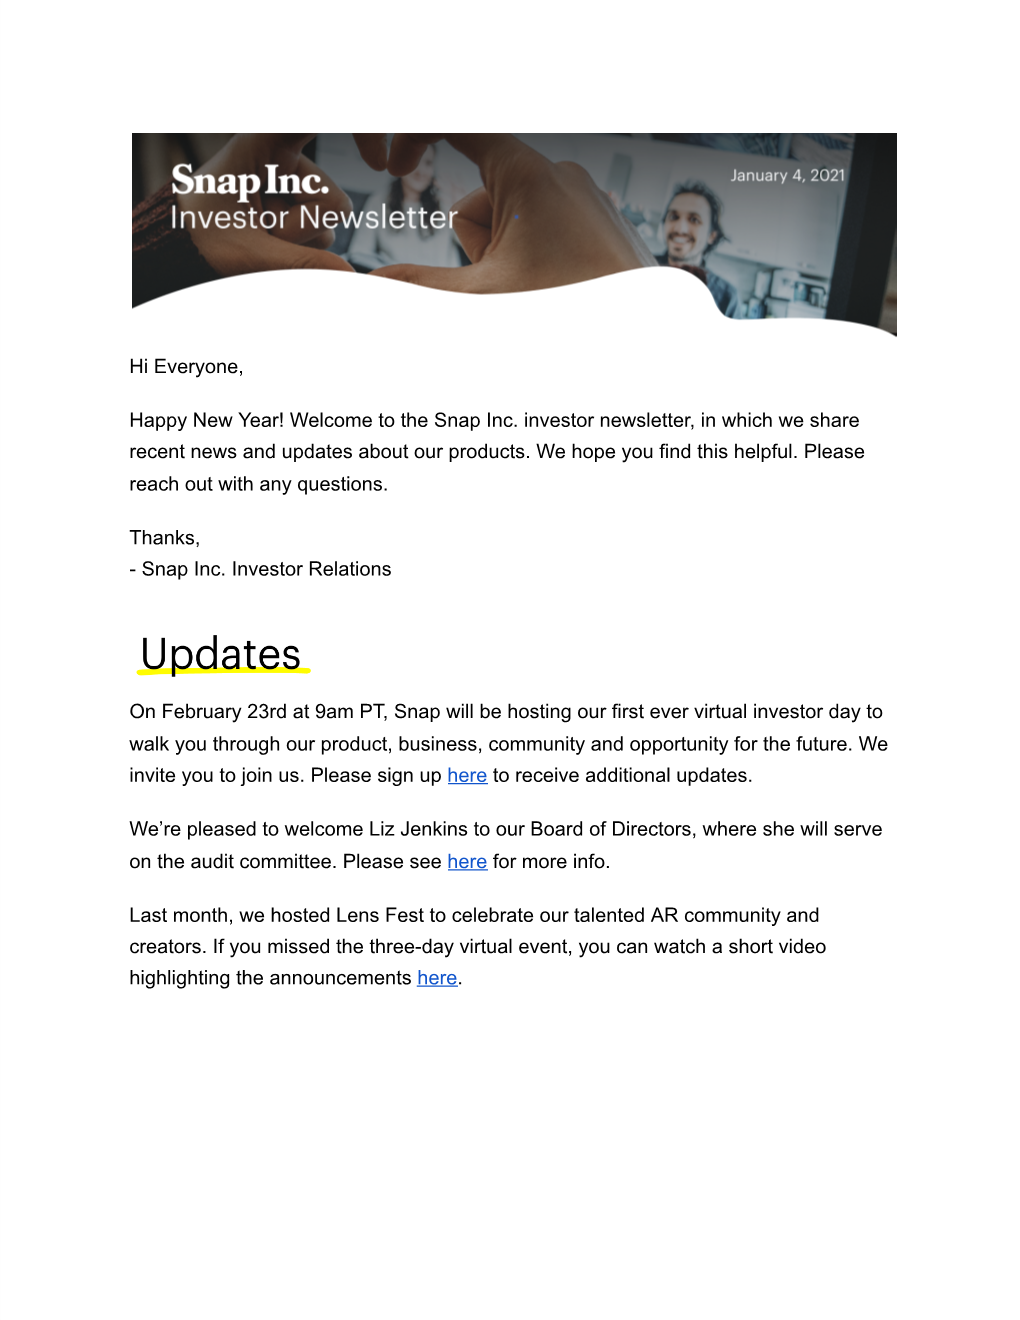 The Snap Inc. Investor Newsletter, in Which We Share Recent News and Updates About Our Products